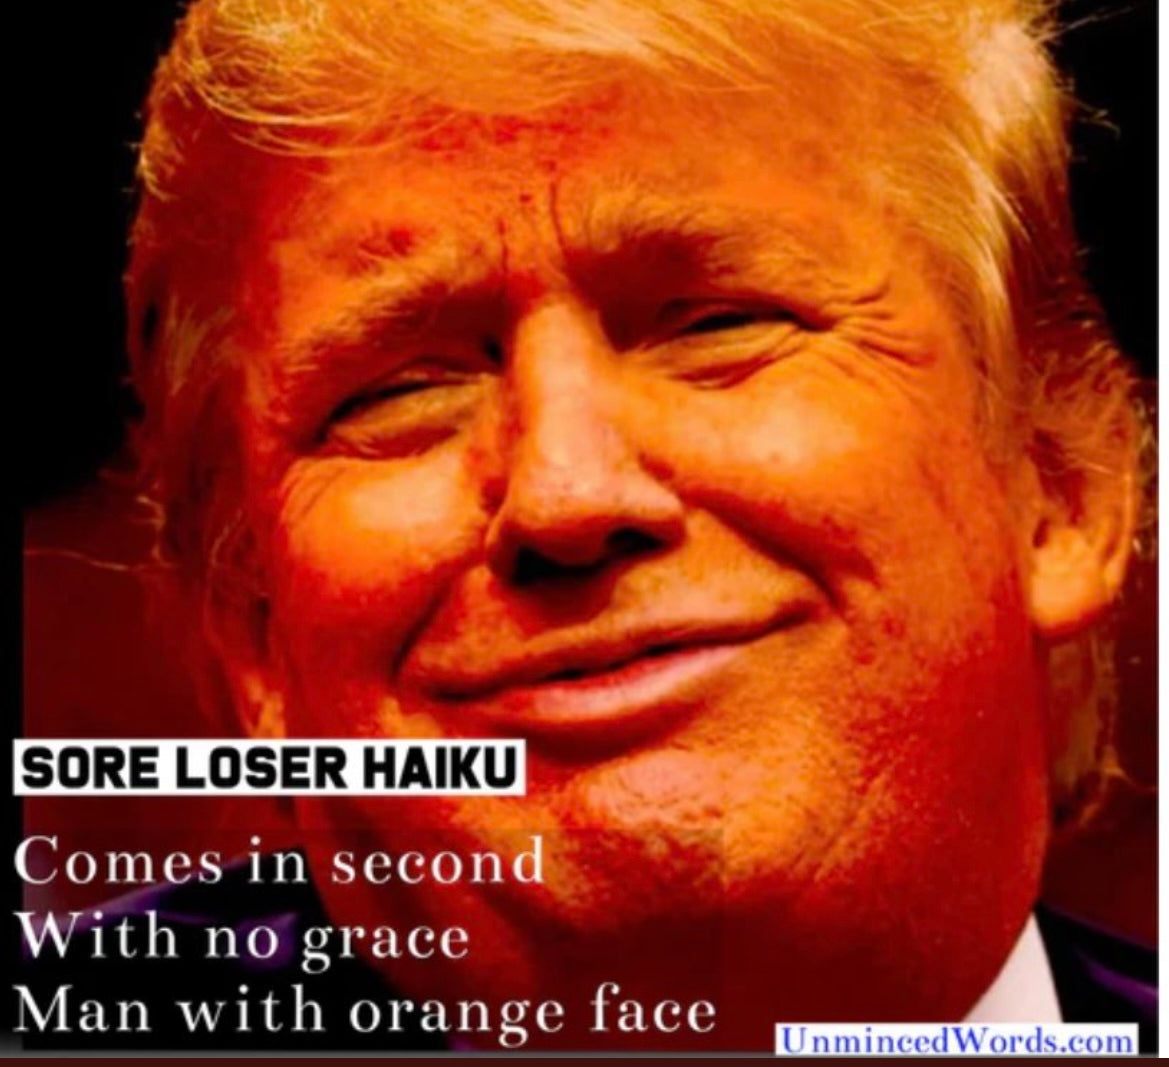 A trump haiku for your day, from UnmincedWords.com